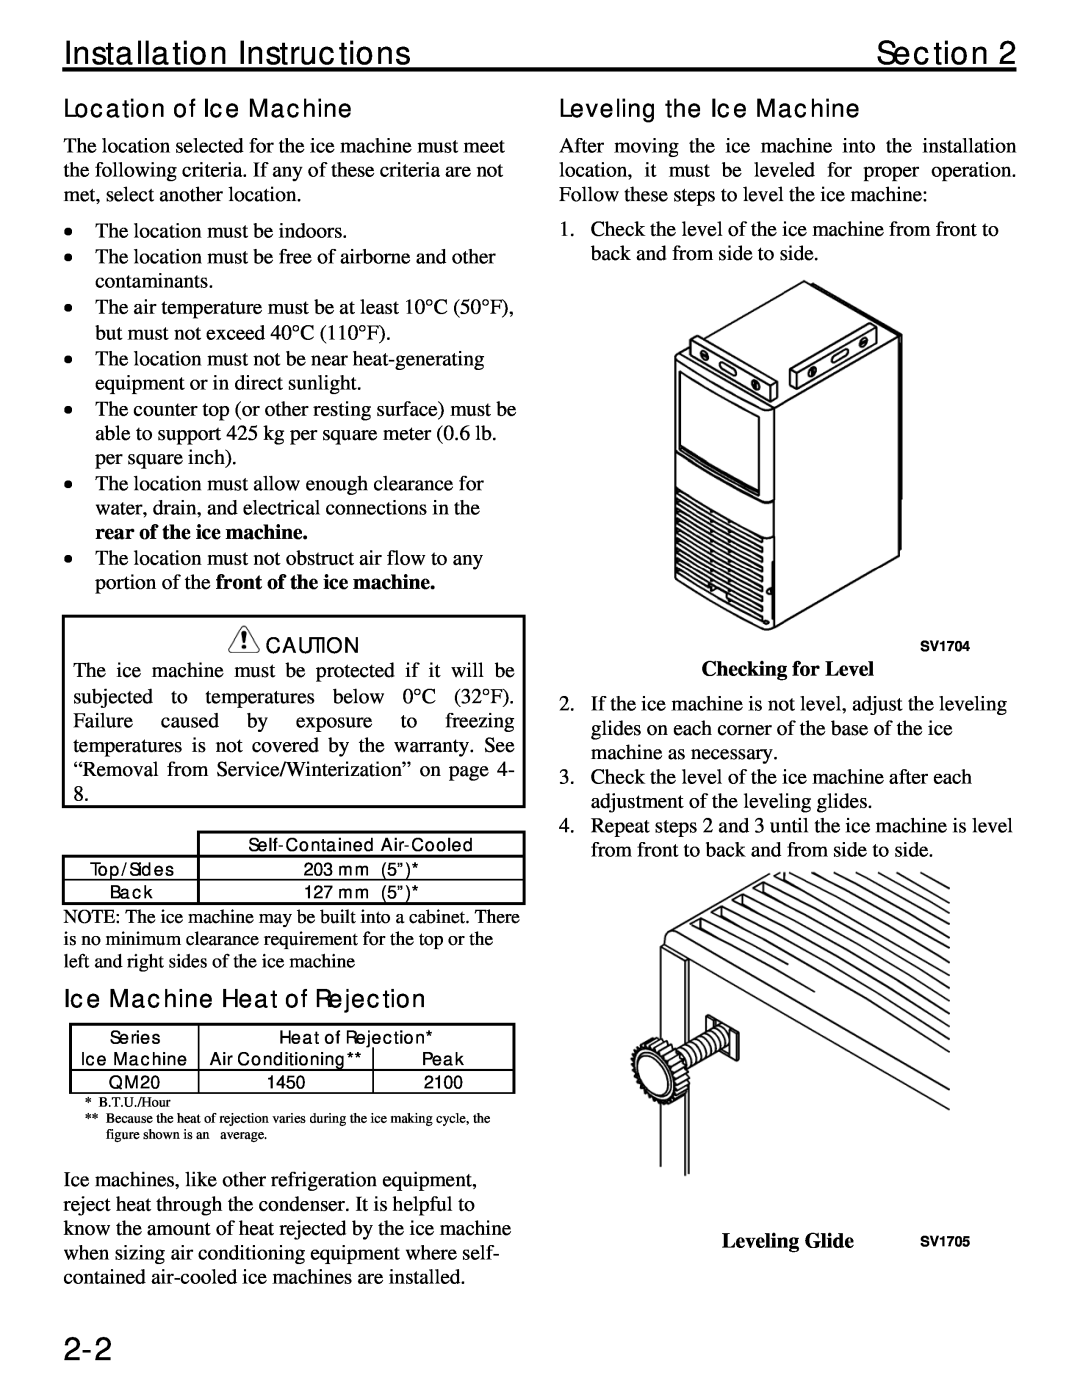 Manitowoc Ice QM20 Installation Instructions, Location of Ice Machine, Ice Machine Heat of Rejection, Checking for Level 